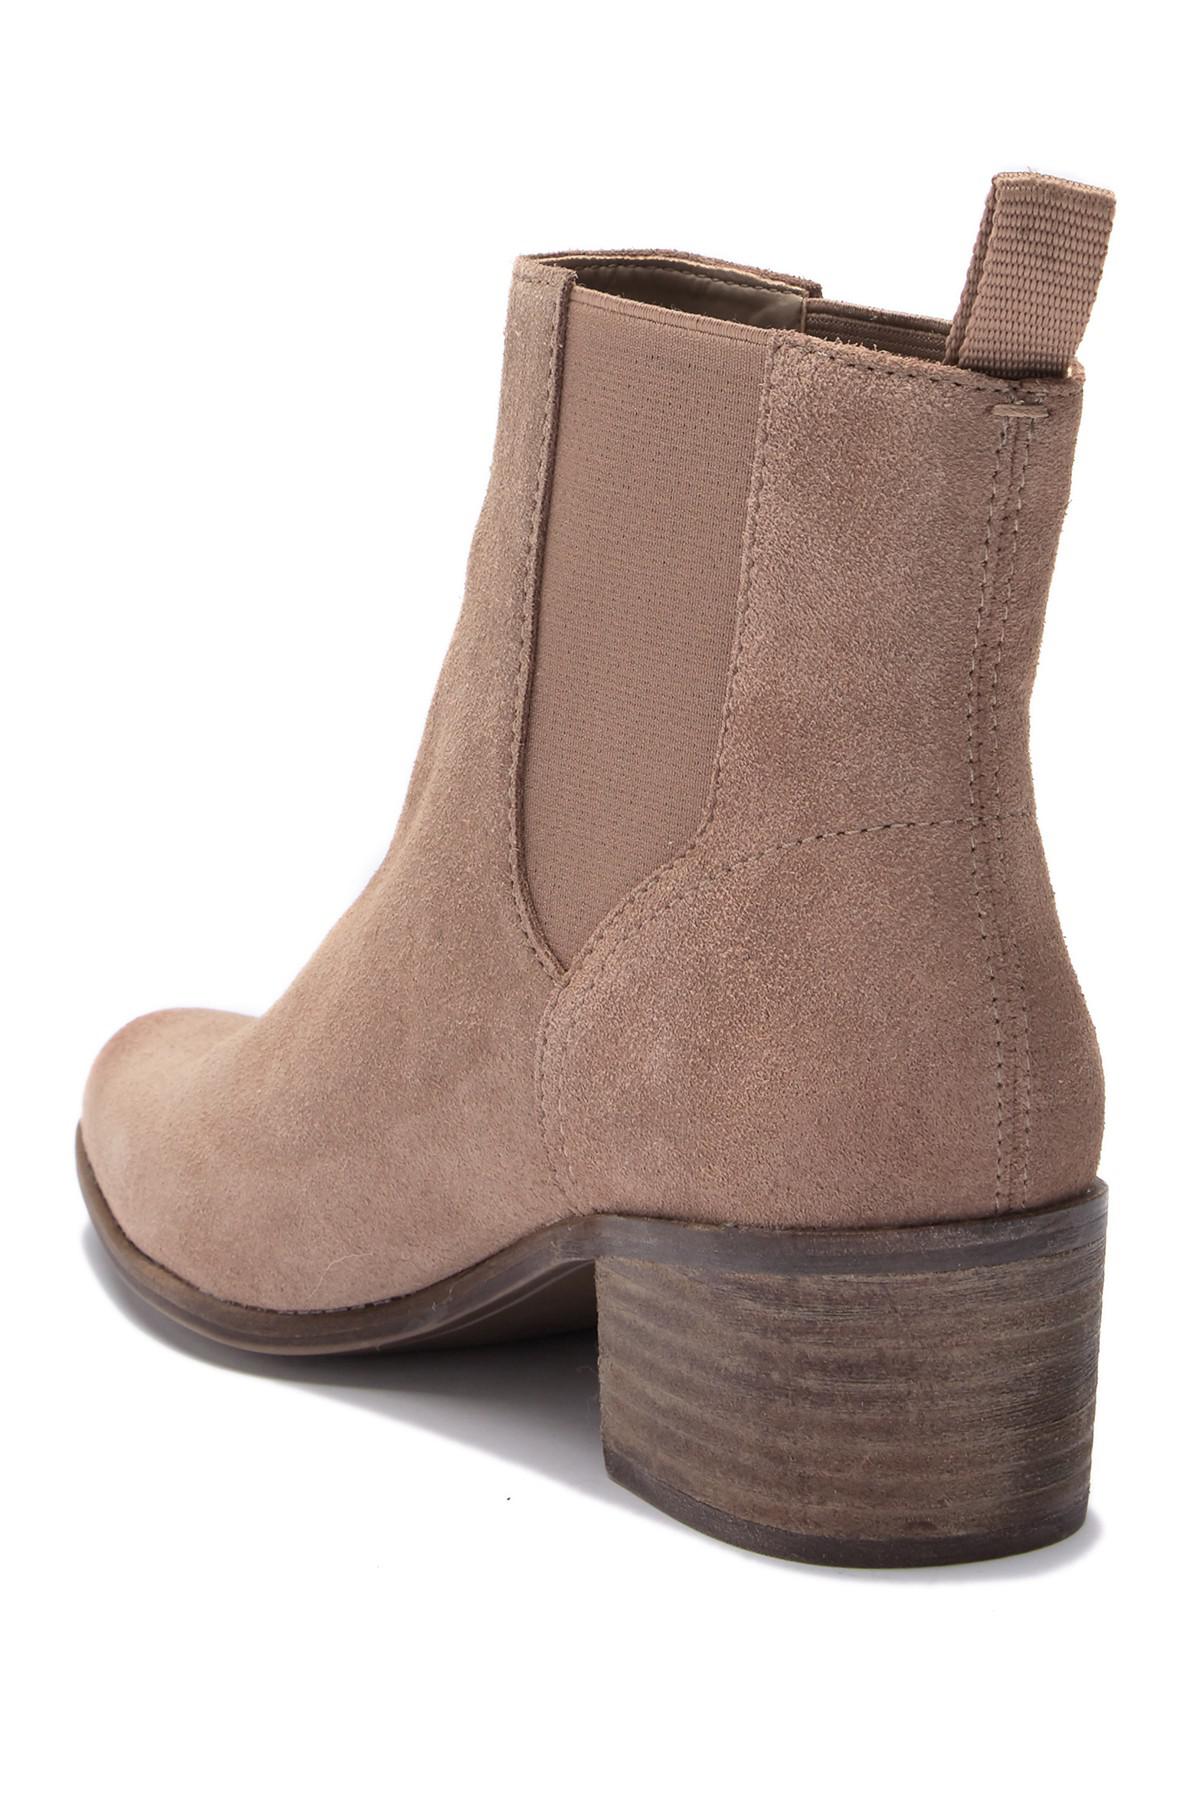 Dolce Vita Cord Suede Chelsea Boot in 